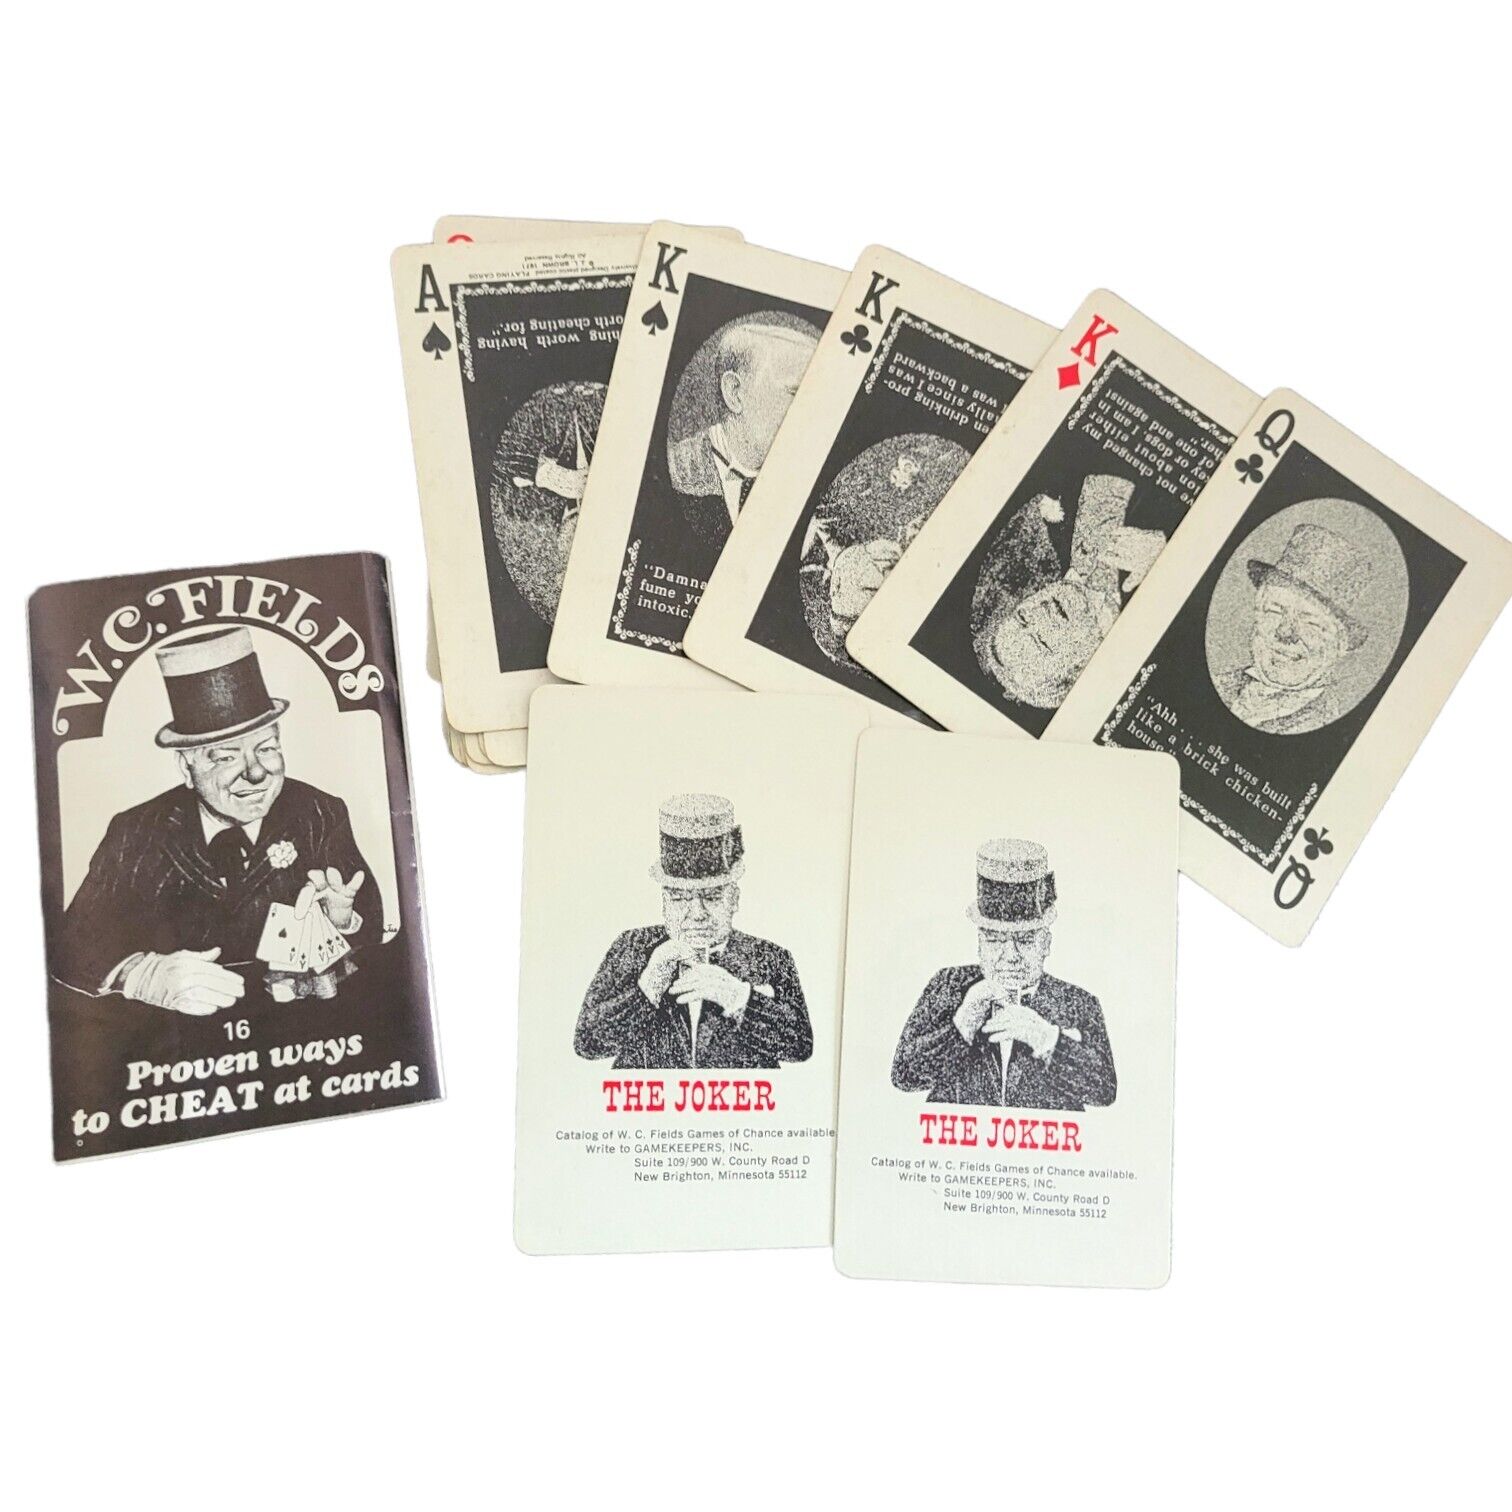 Vintage WC Fields 16 Proven Ways To Cheat At Cards Novelty Trick Playing Cards